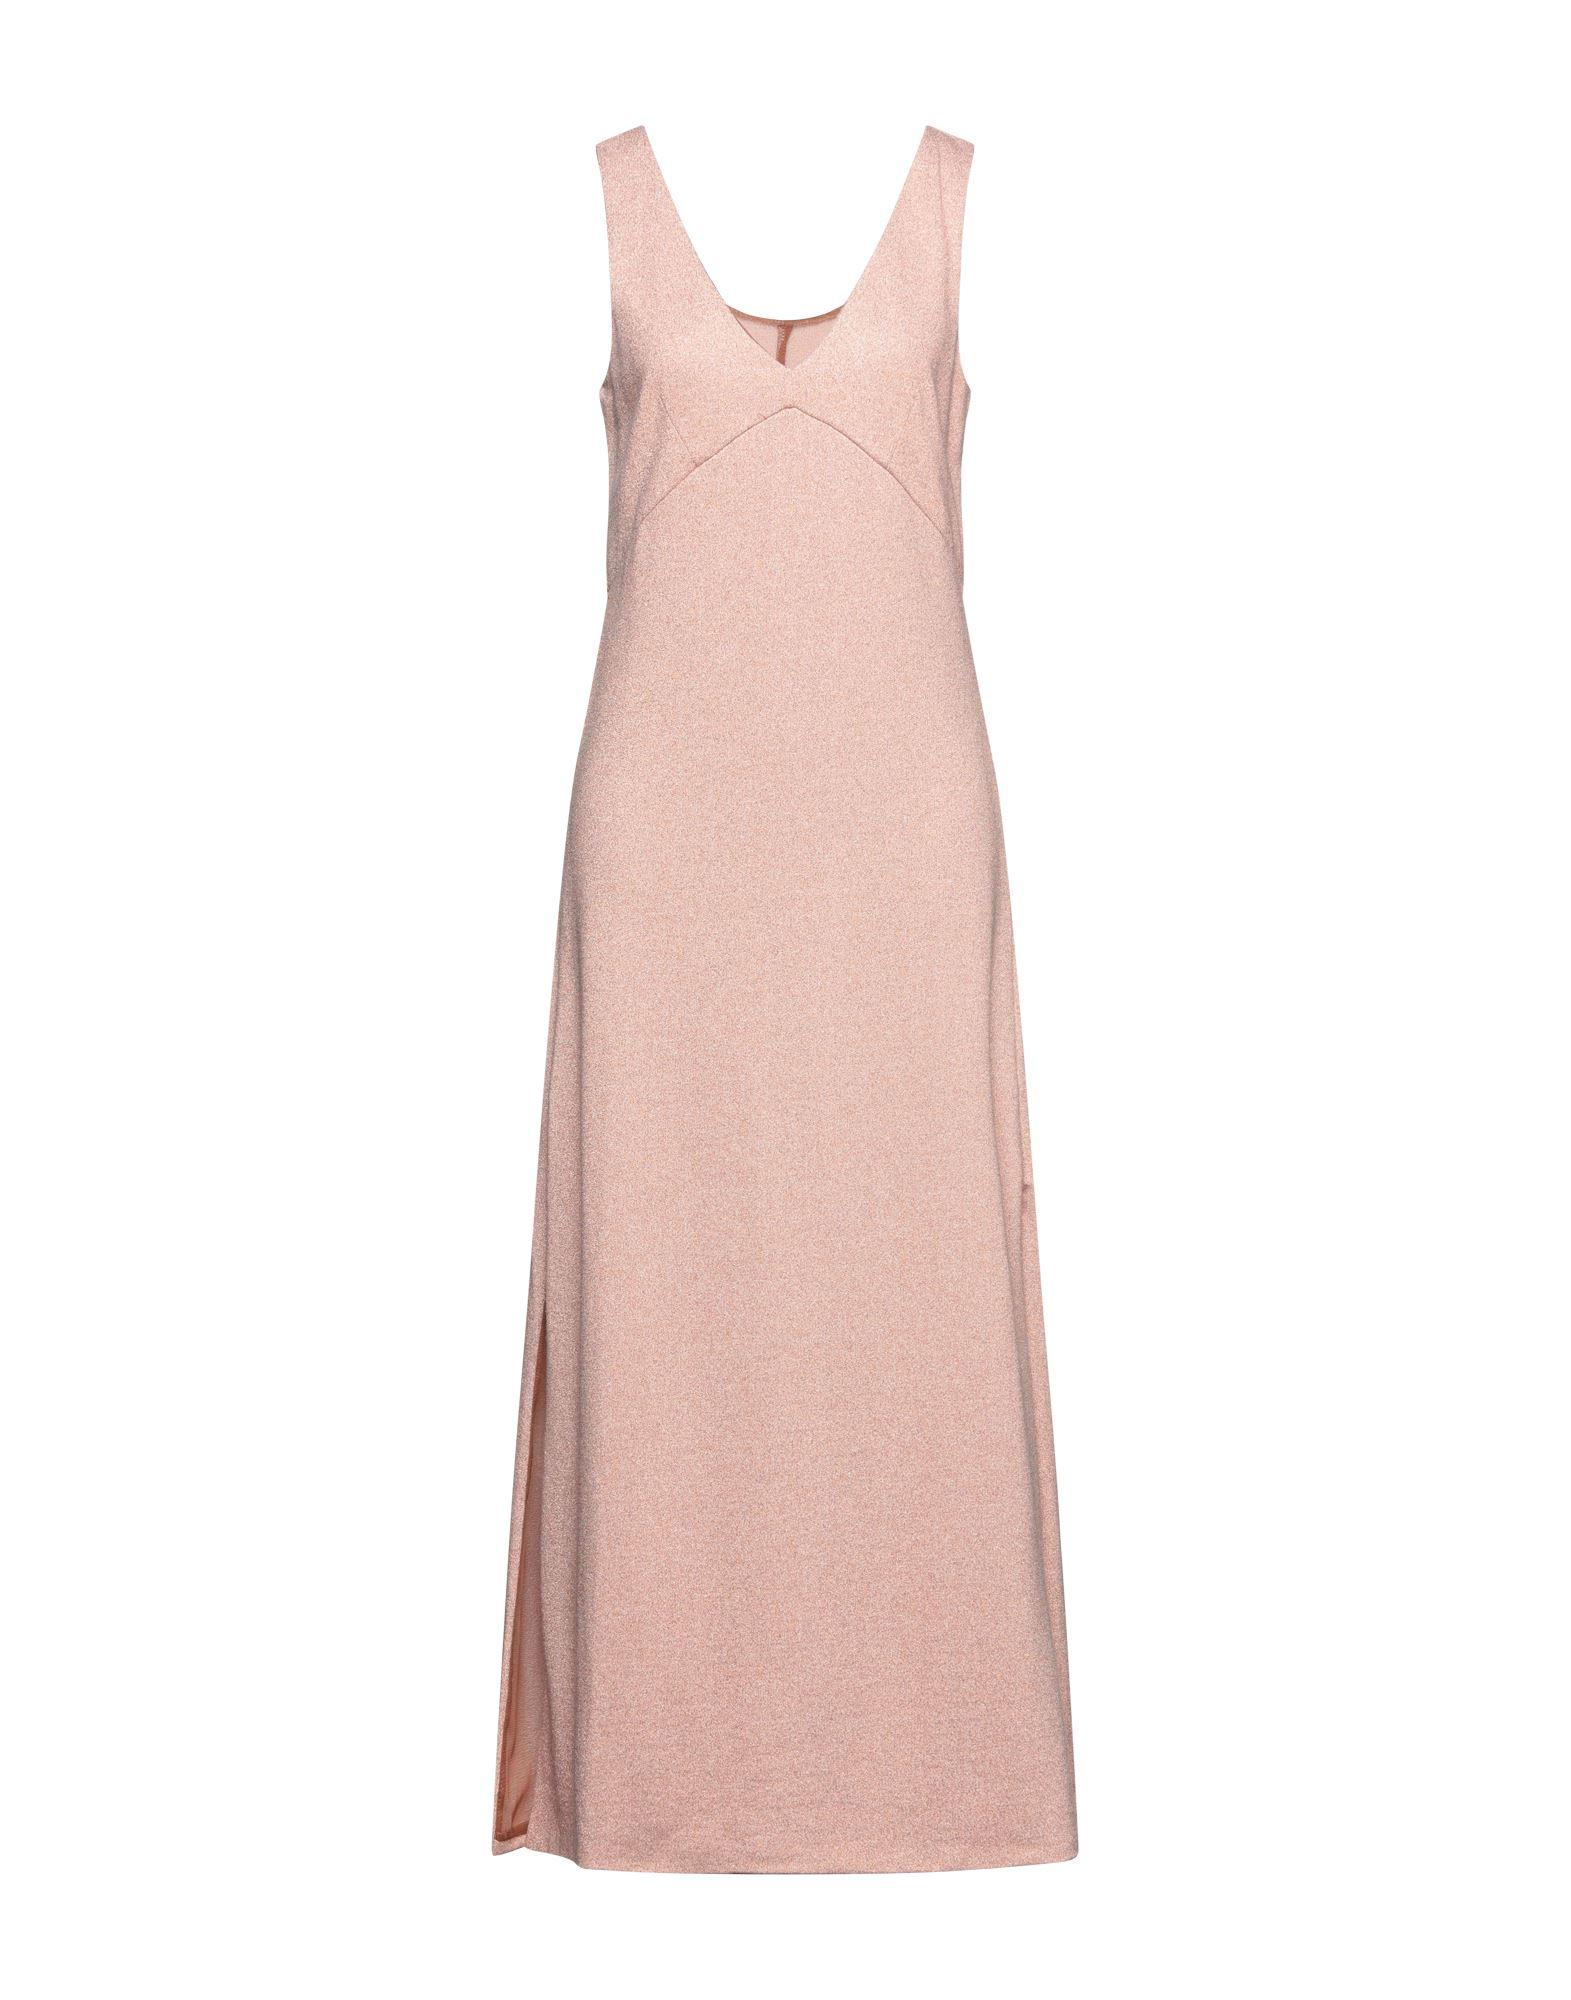 Satine Label Tulle Long Dress in Copper (Pink) - Lyst